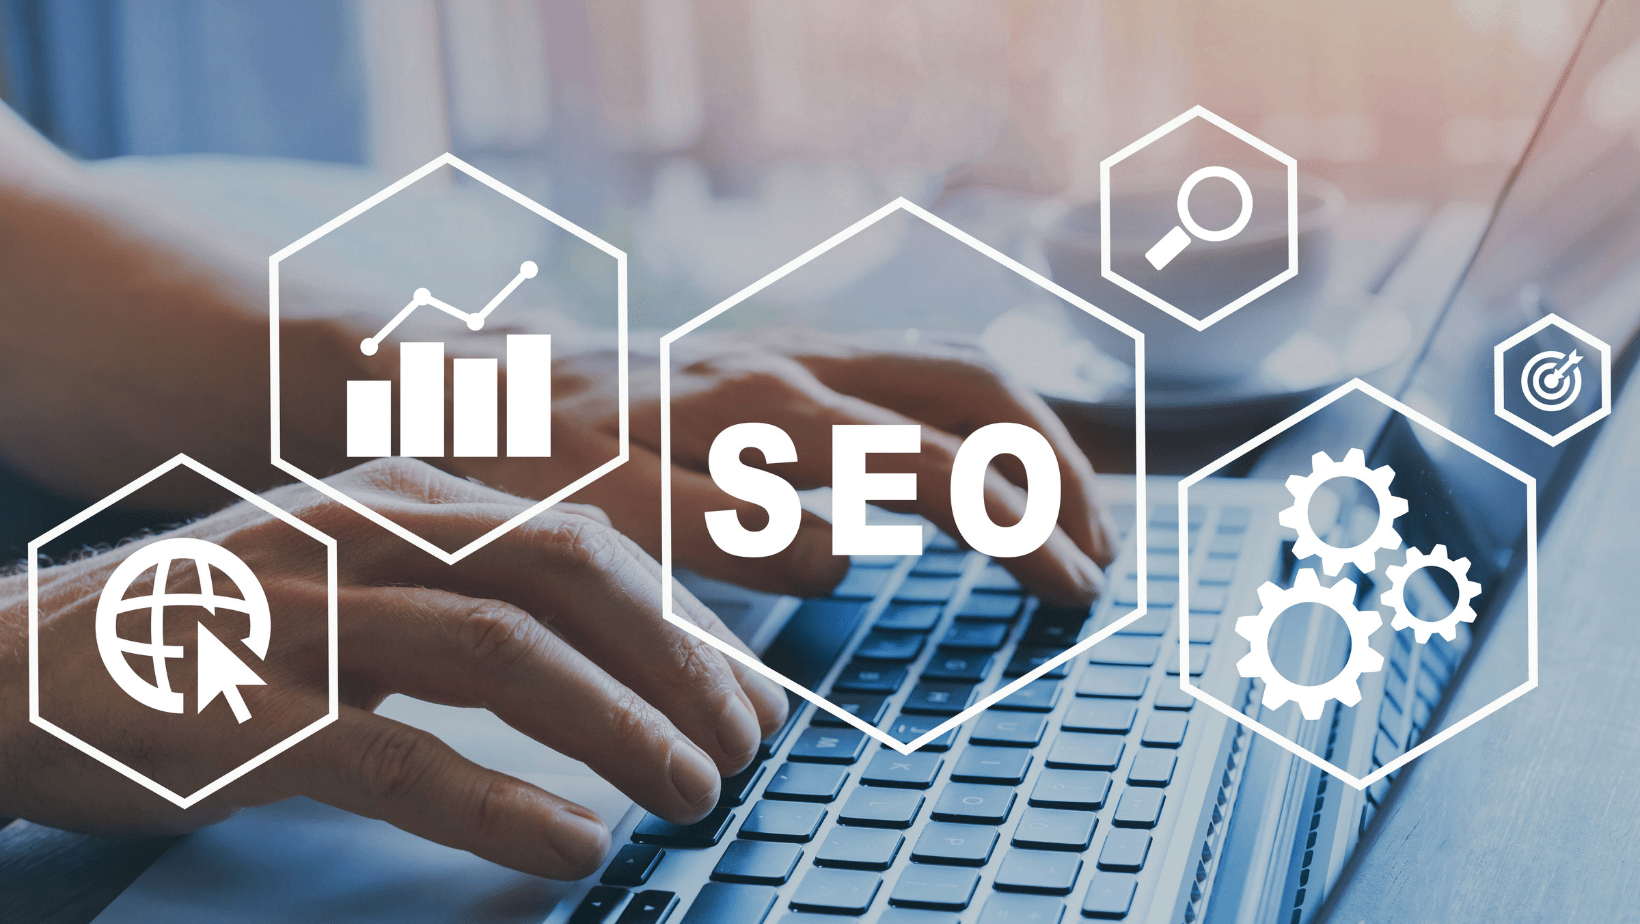 5 SEO Tips That Will Definitely Improve Your Rankings